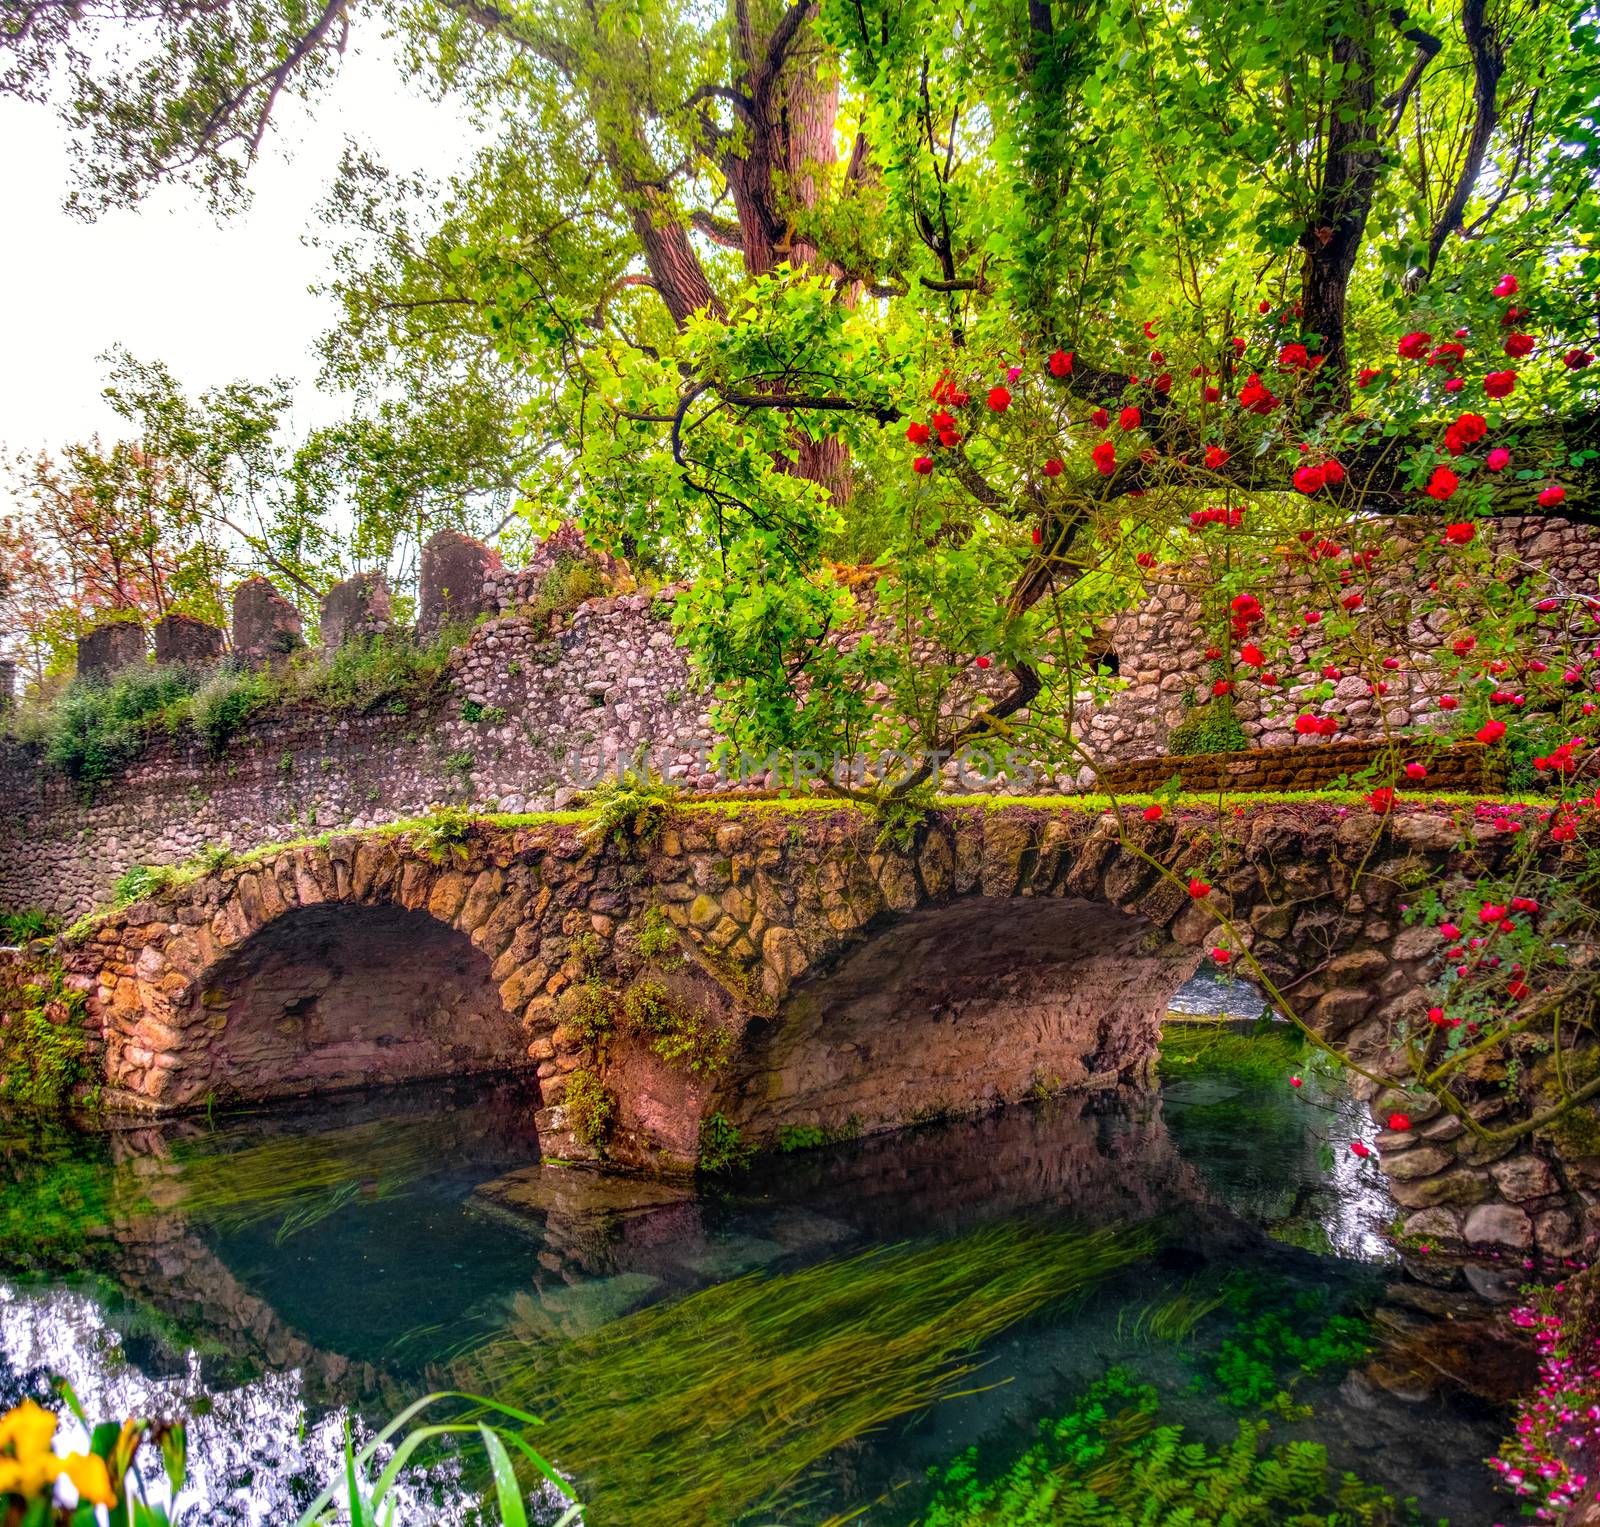 medieval stone bridge in eden colourful garden vibrant with roses and river  by LucaLorenzelli